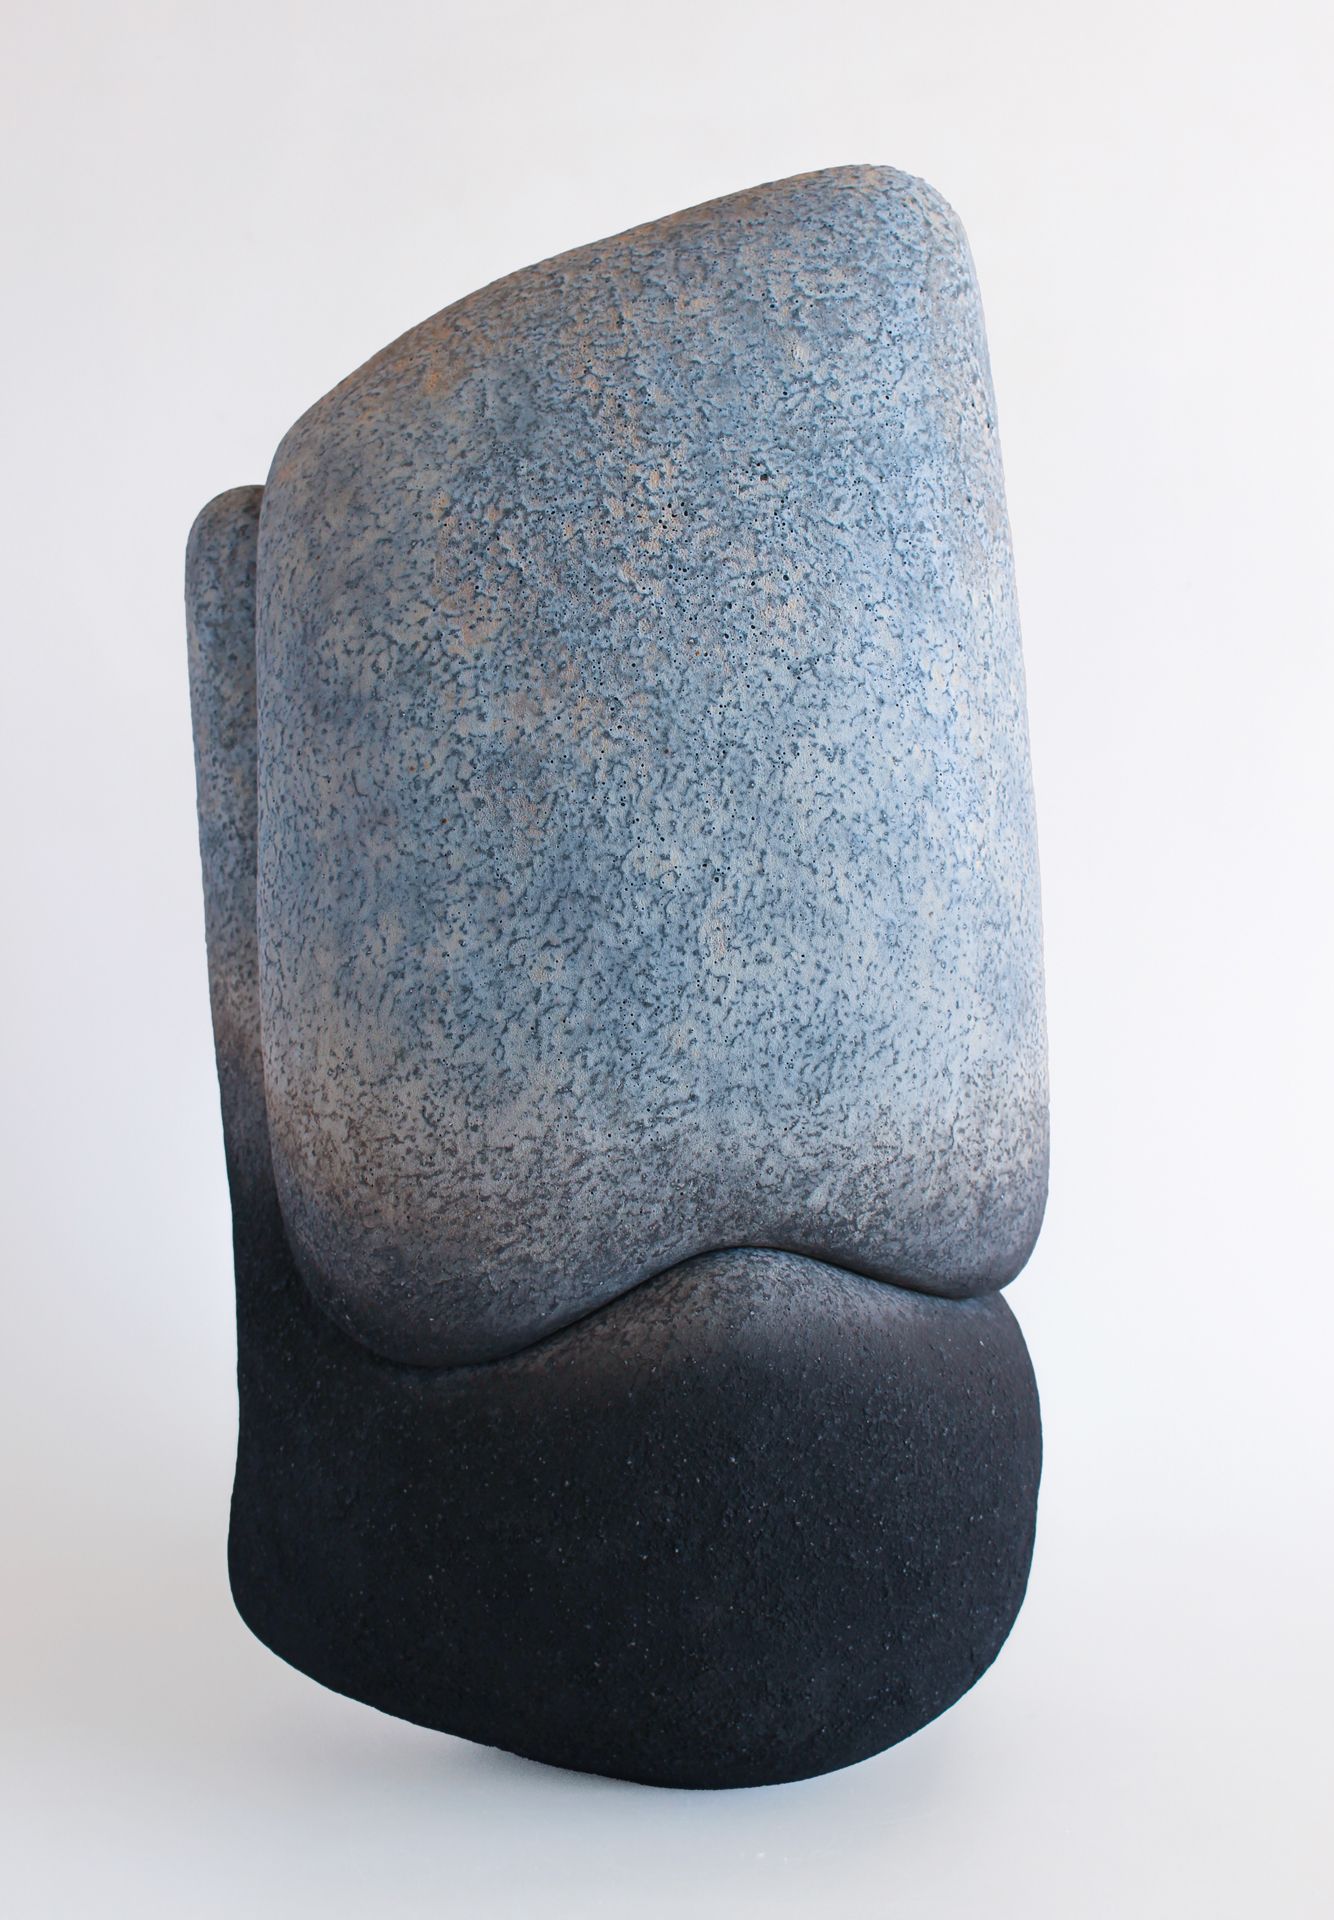 Ceramic sculpture by Japanese artist Kenji Gomi. It is a vertical piece, composed of two parts that fit together perfectly. The work displays a texture reminiscent of rocks, featuring blue hues due to cobalt as well as black areas achieved through smoking.